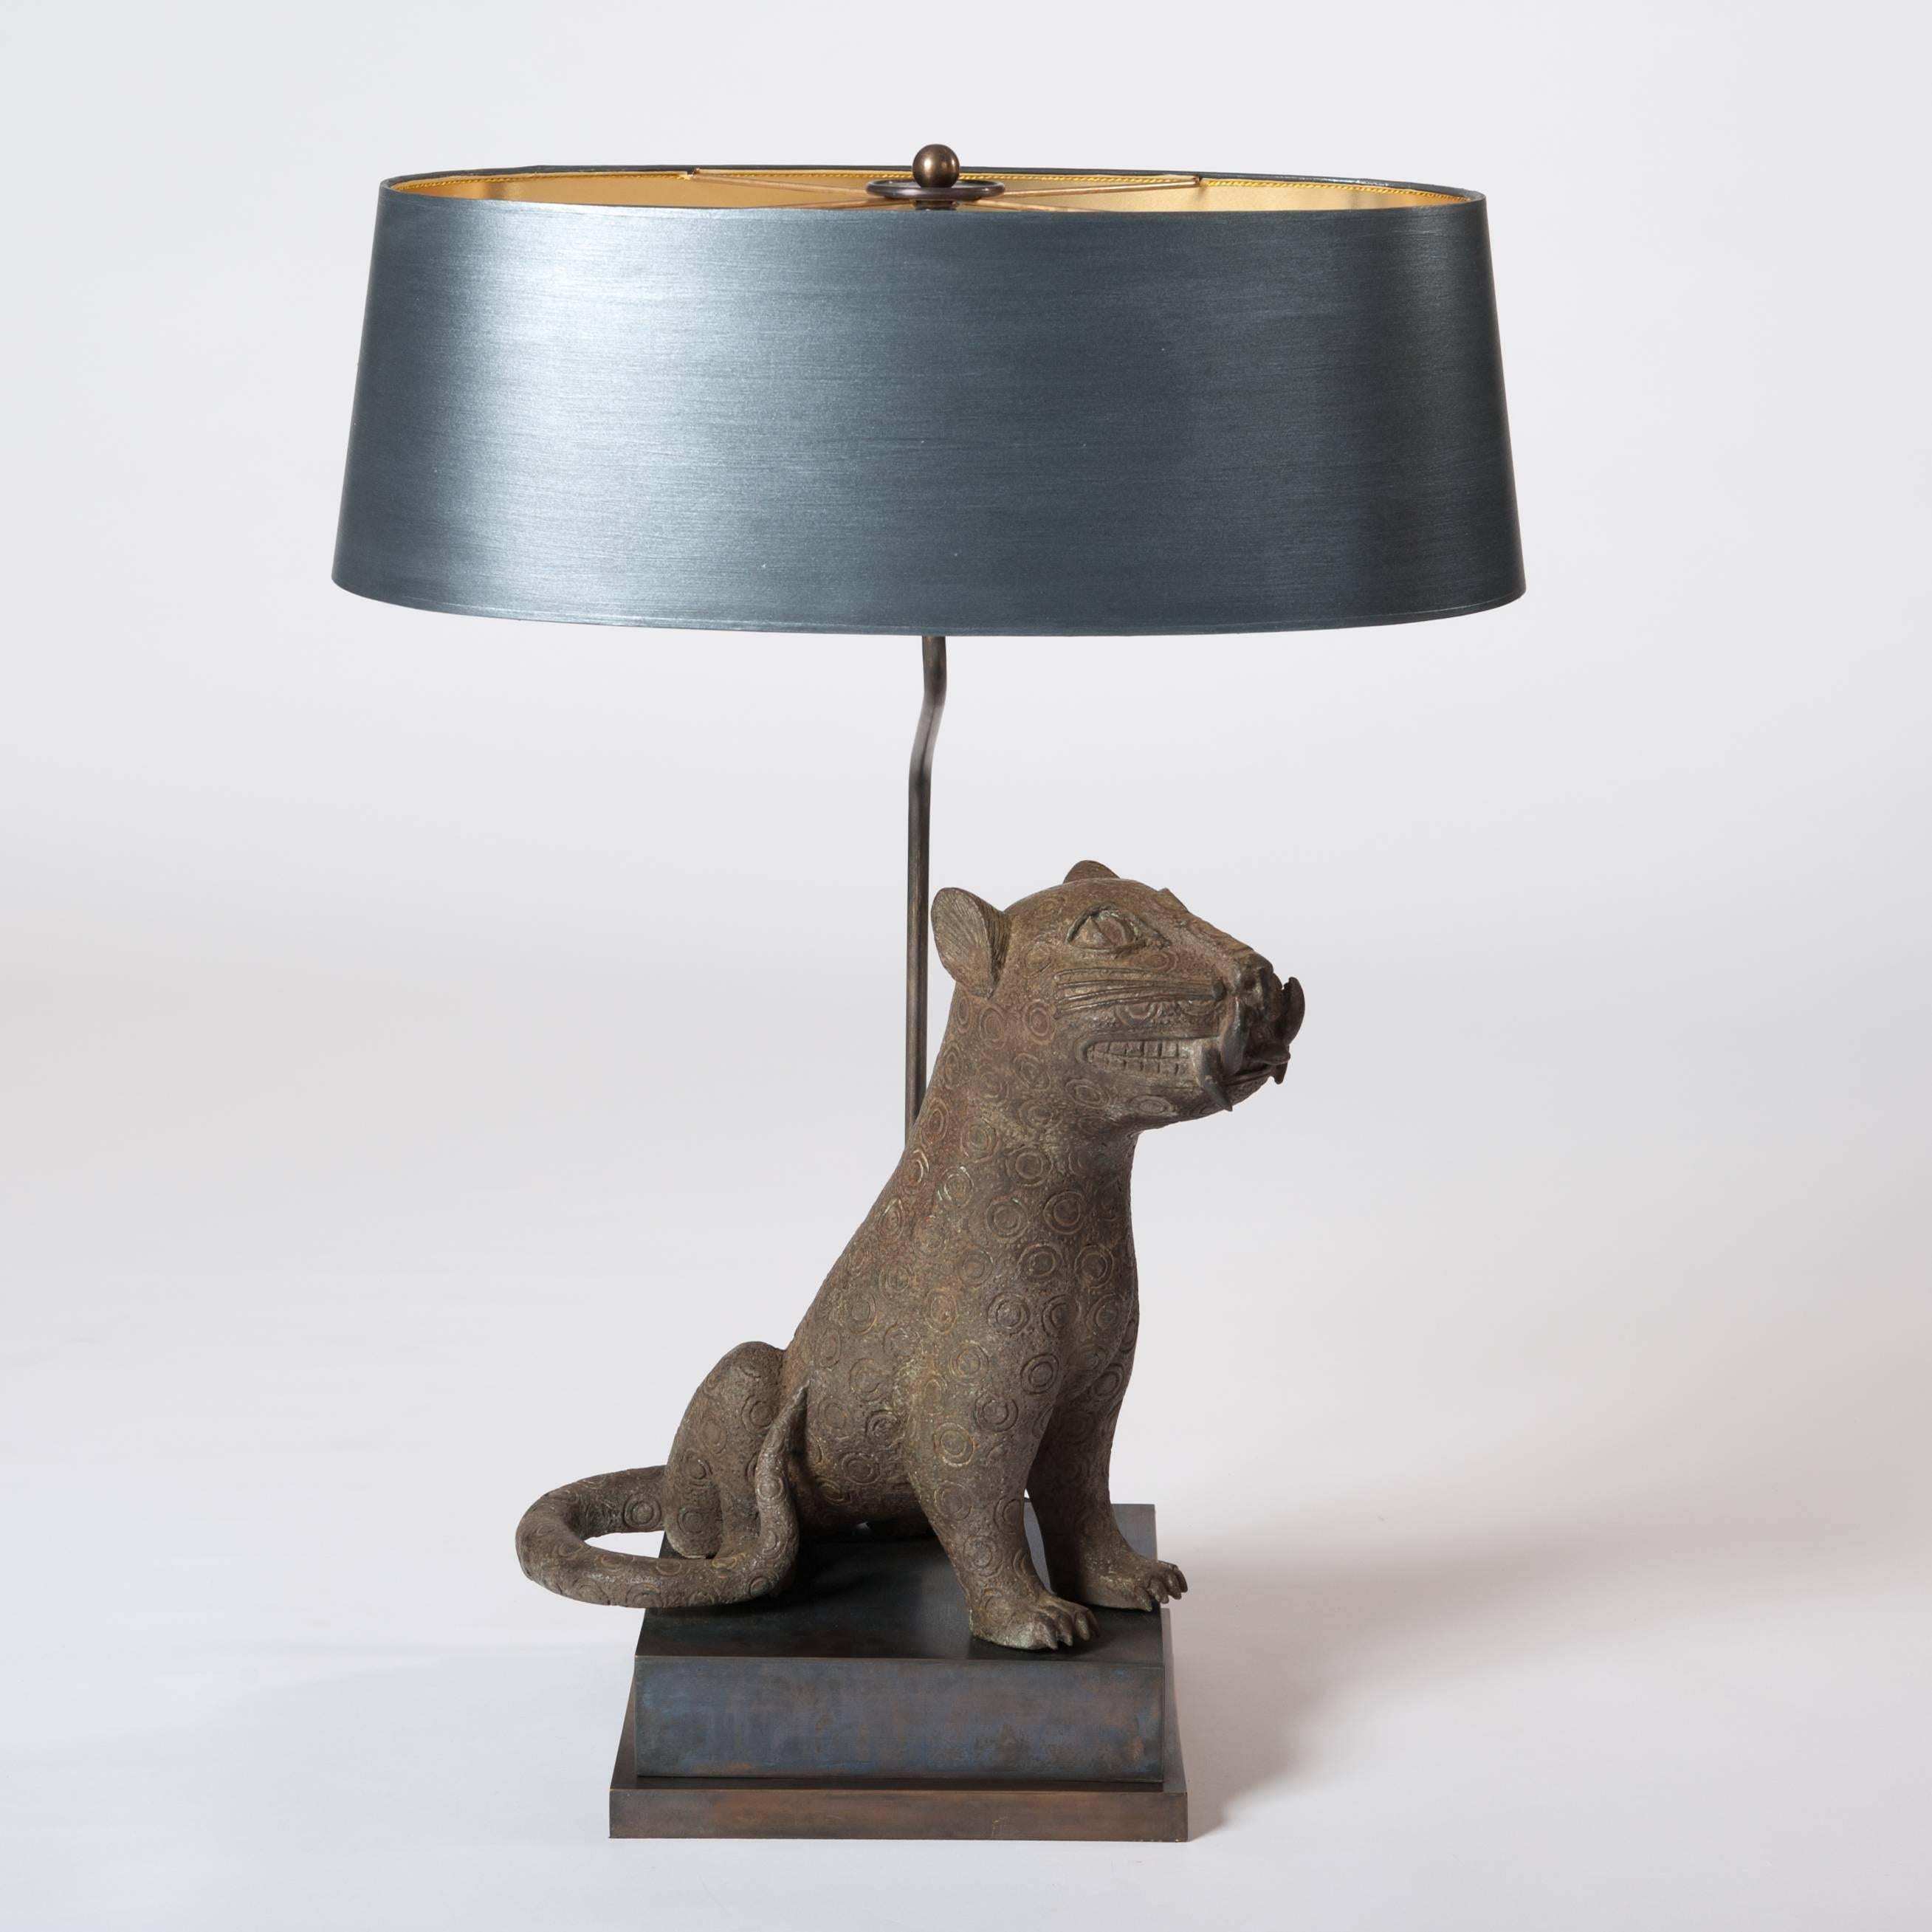 A very fine mid-century cast bronze from Benin arranged with a specially designed lamp construction and socle.
The oval lampshade is hand-painted in anthracite-grey color with fine
overlay in silver powder.